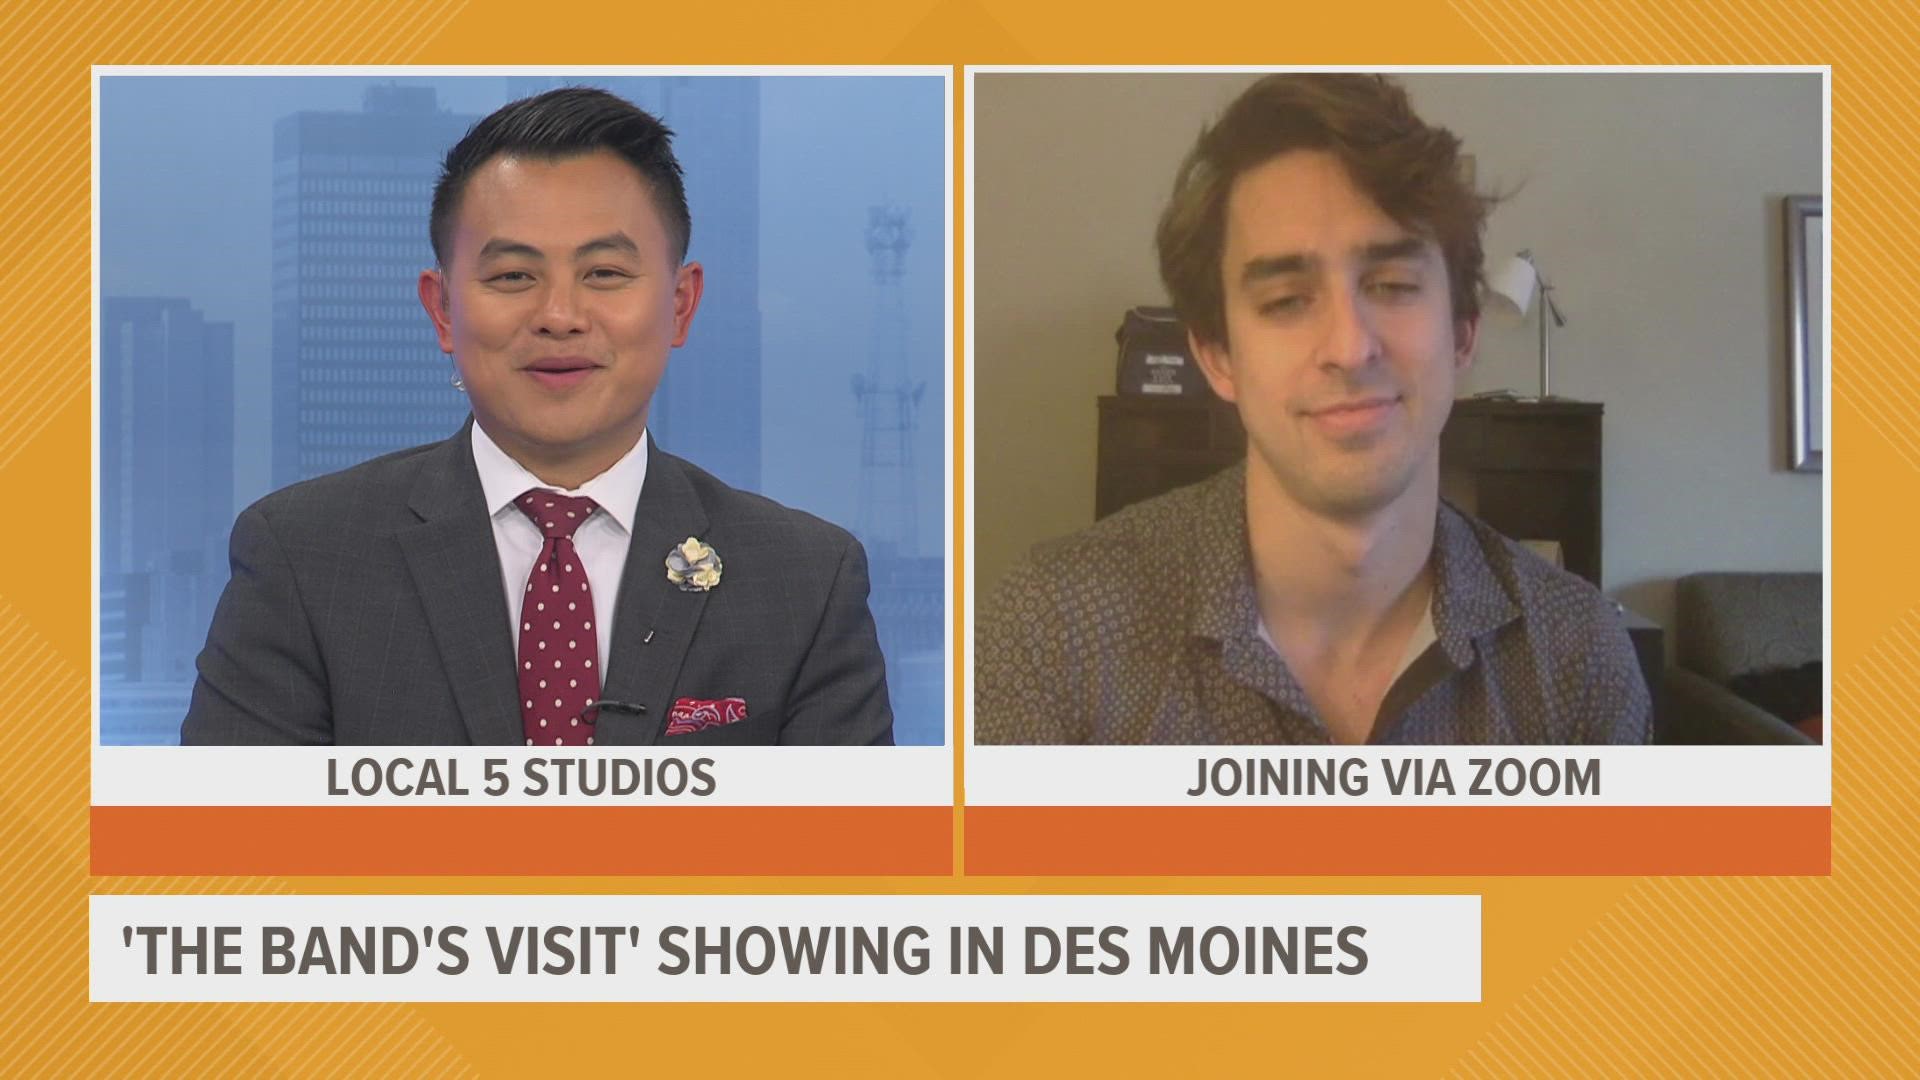 We sat down with actor Billy Cohen who plays the role of Zelger in "The Band's Visit." Catch the musical at the Des Moines Civic Center Oct. 12-17.